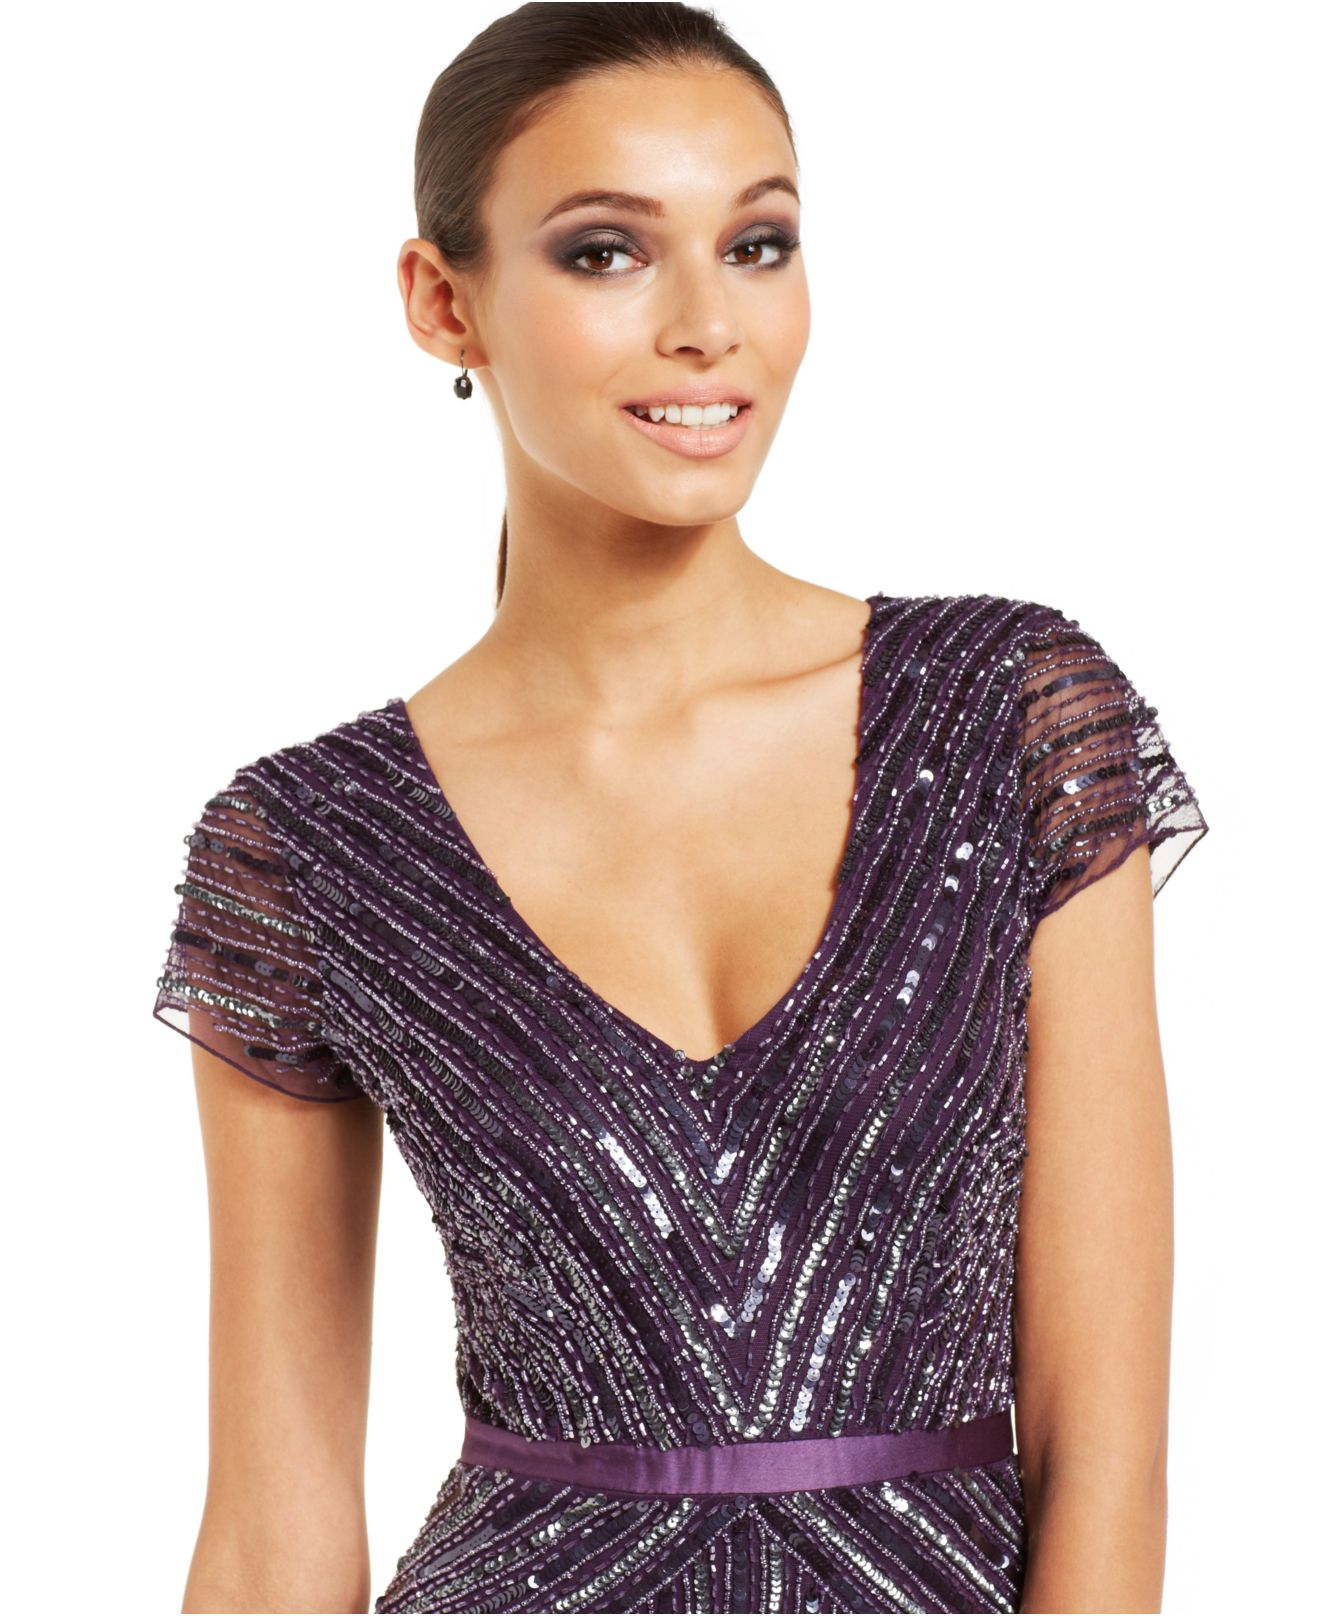 Adrianna Papell Adrianna Petite Papell Cap-Sleeve Sequined Gown in Purple |  Lyst